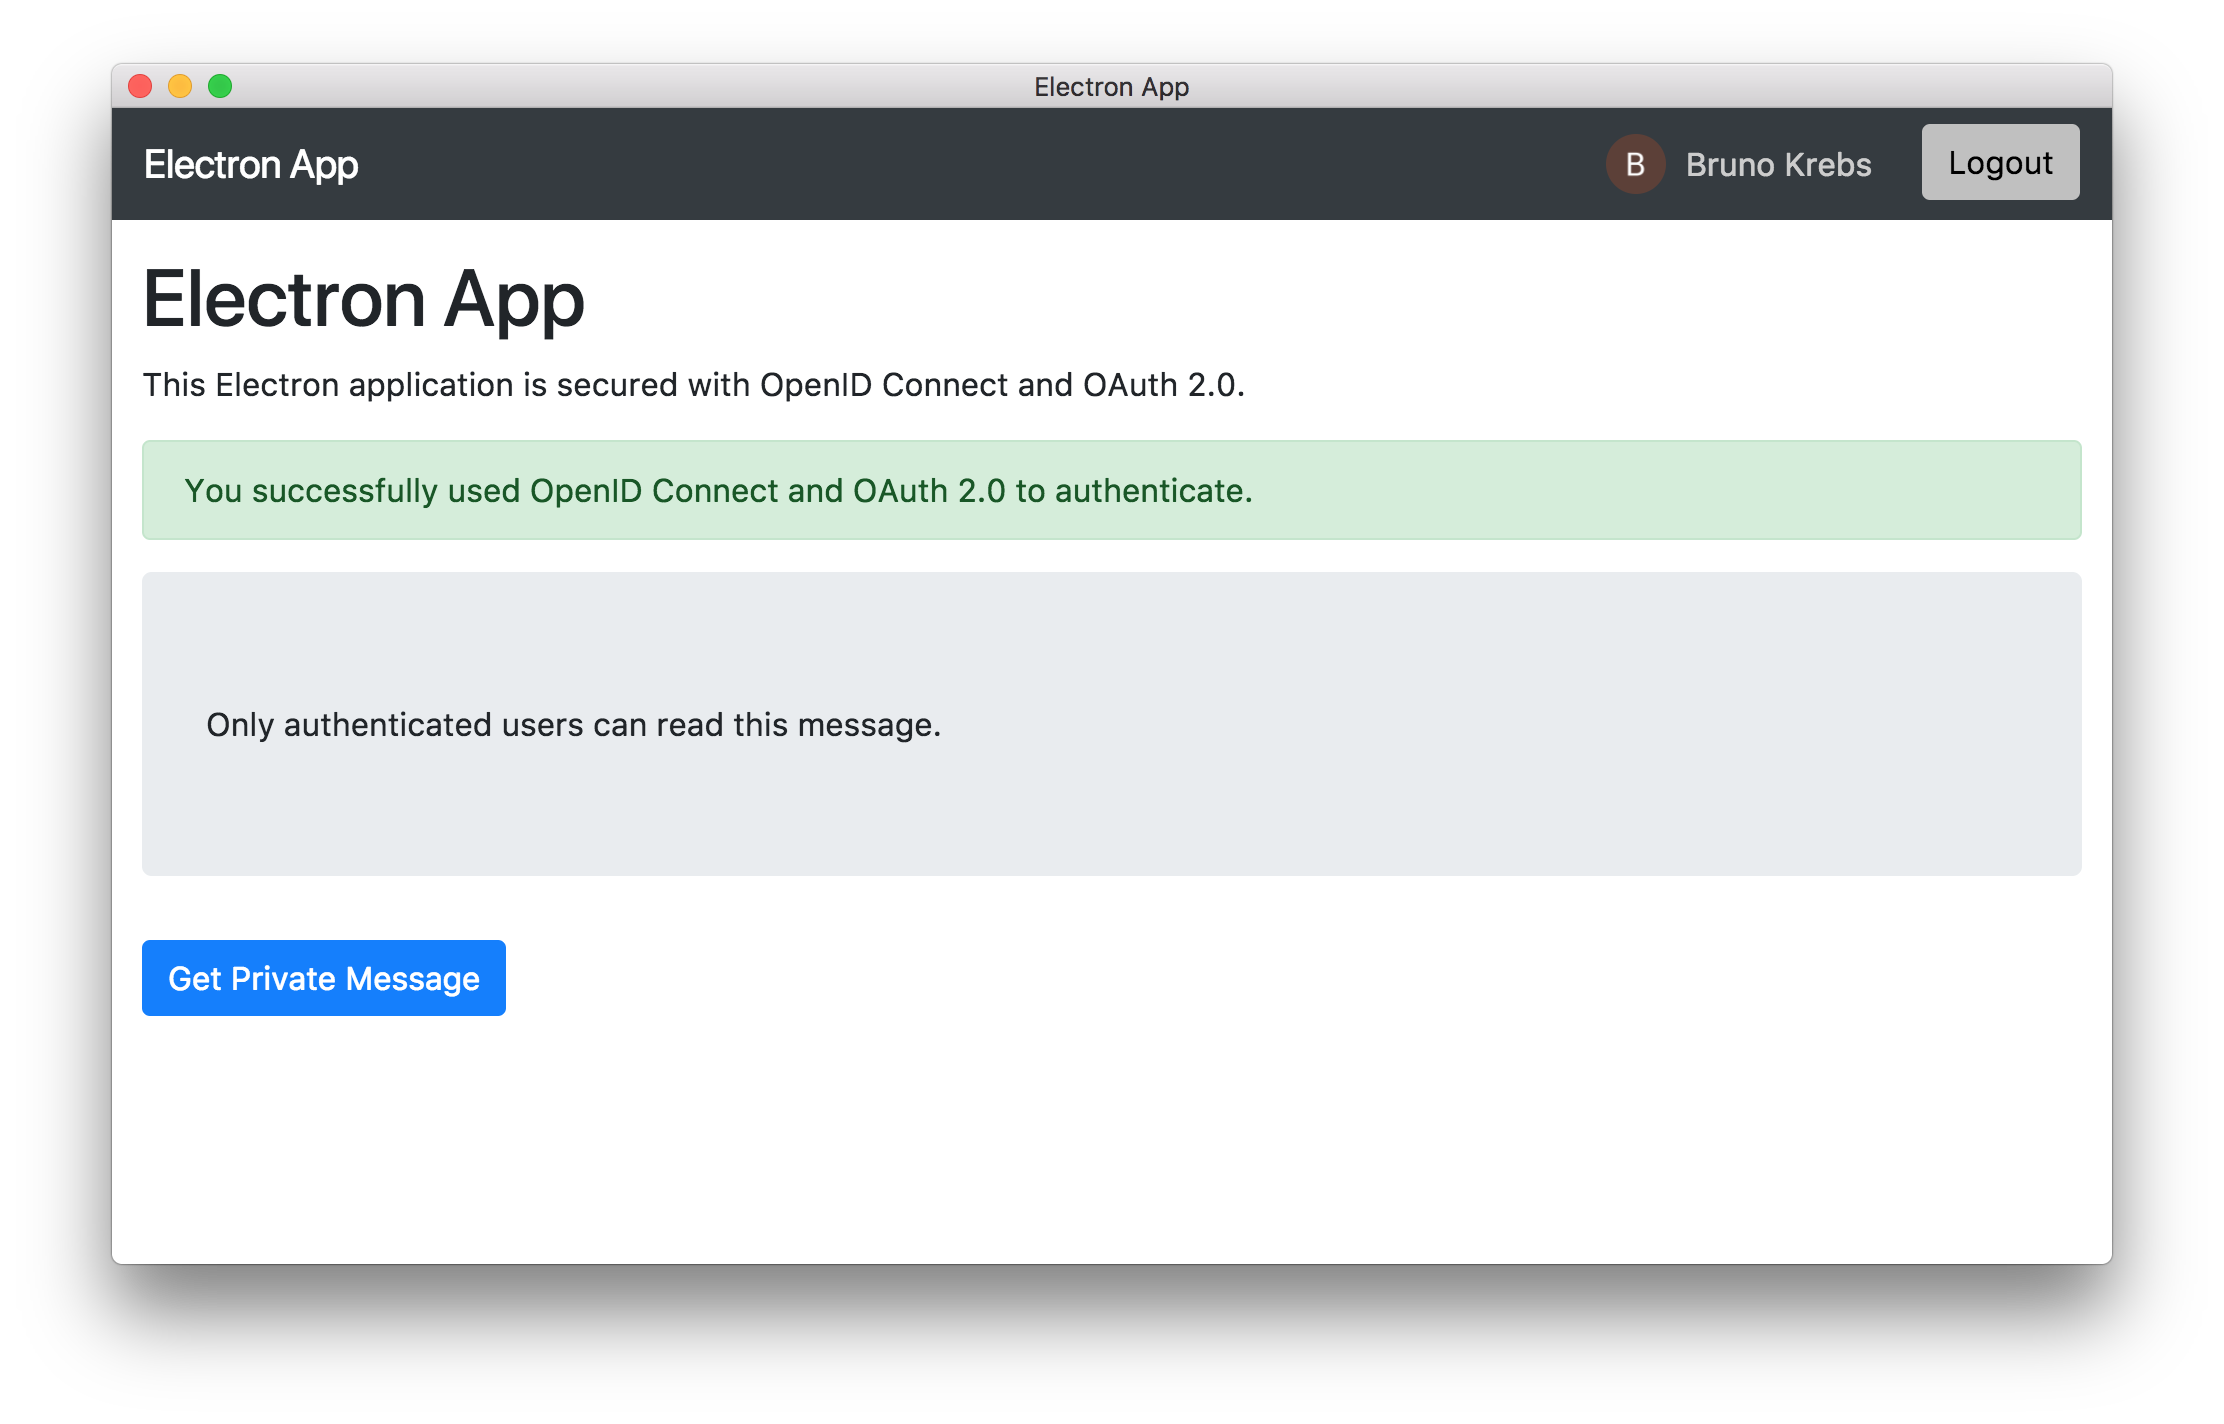 Running an Electron application secured with OpenID Connect and OAuth 2.0.